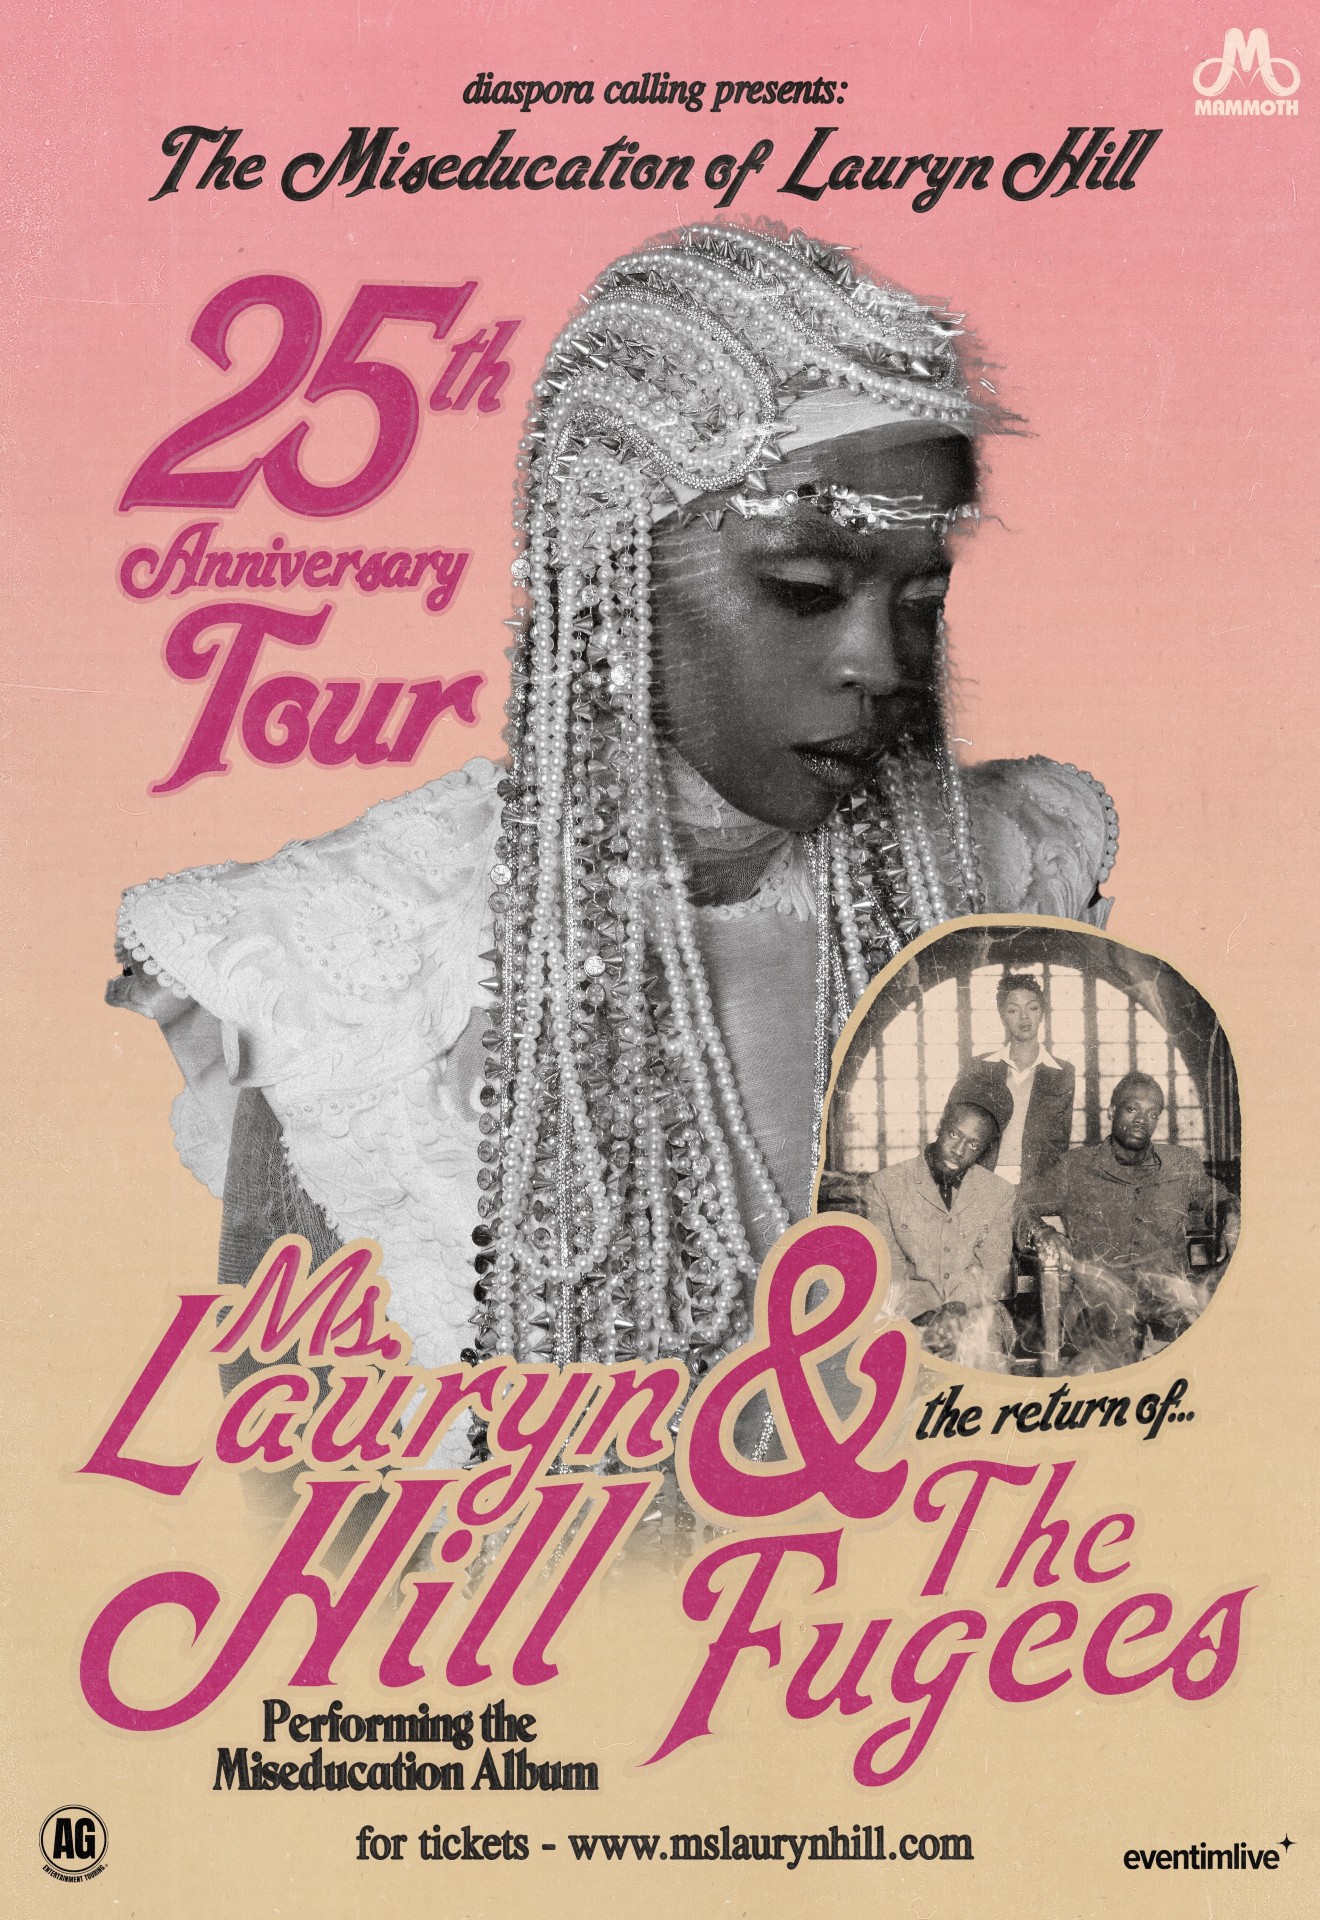 Ms. Lauryn Hill “The Miseducation of Lauryn Hill 25th Anniversary Tour” Poster